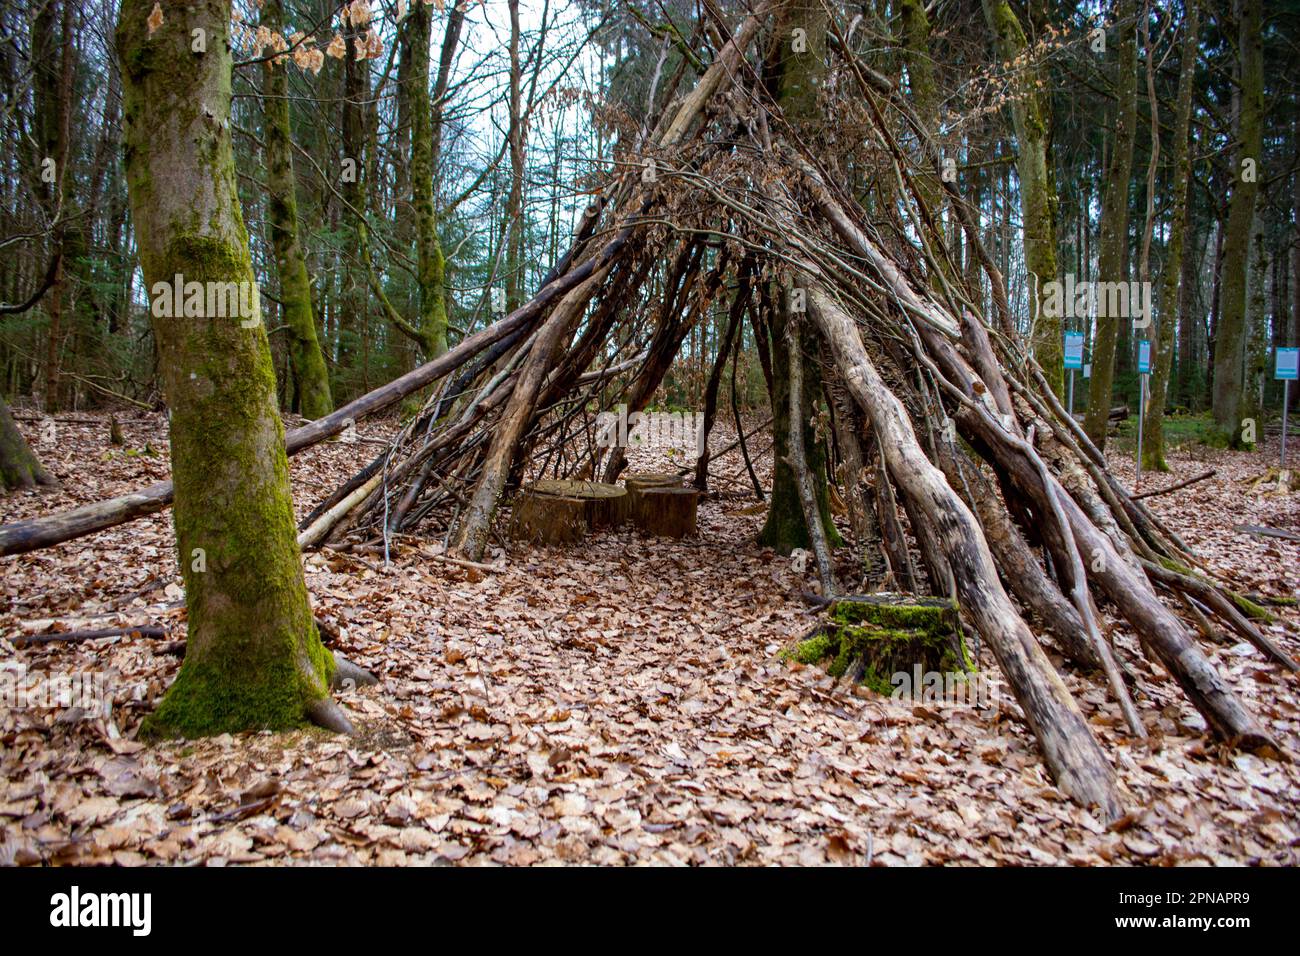 Tipi in a nature experience forest at Bad Saulgau, Germany Stock Photo